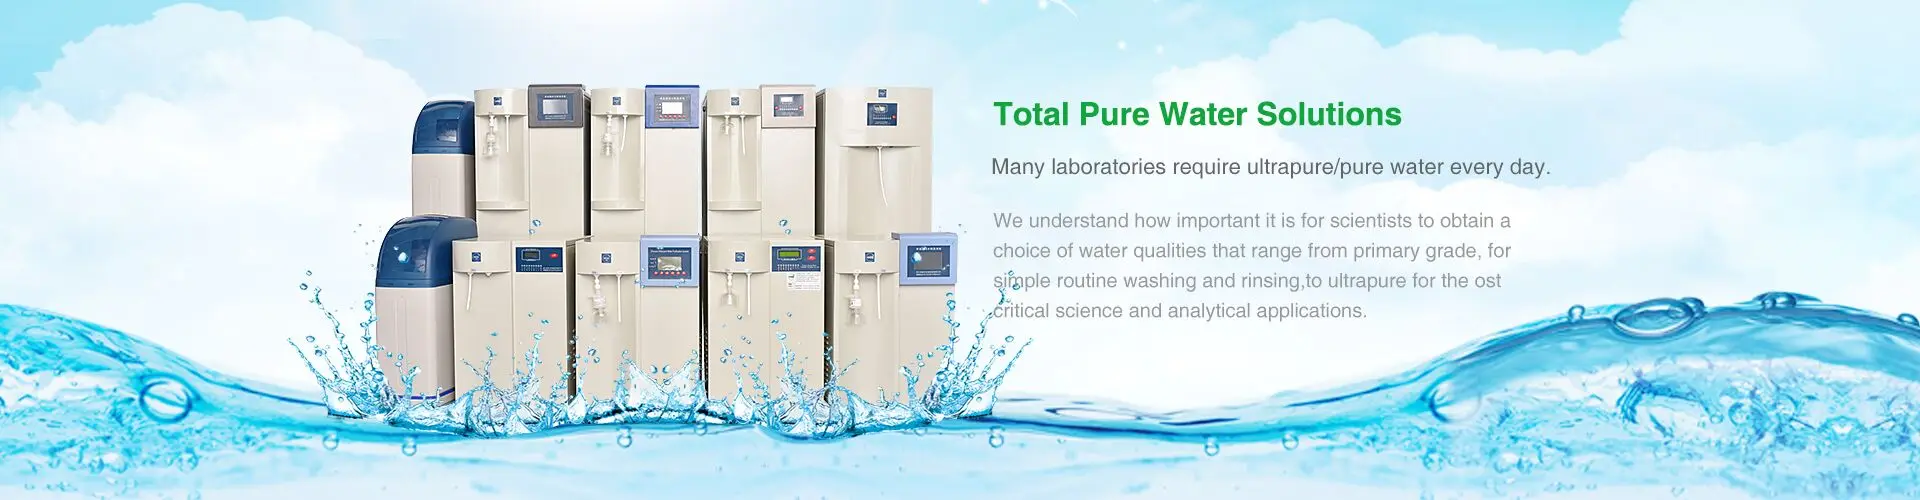 high purity water